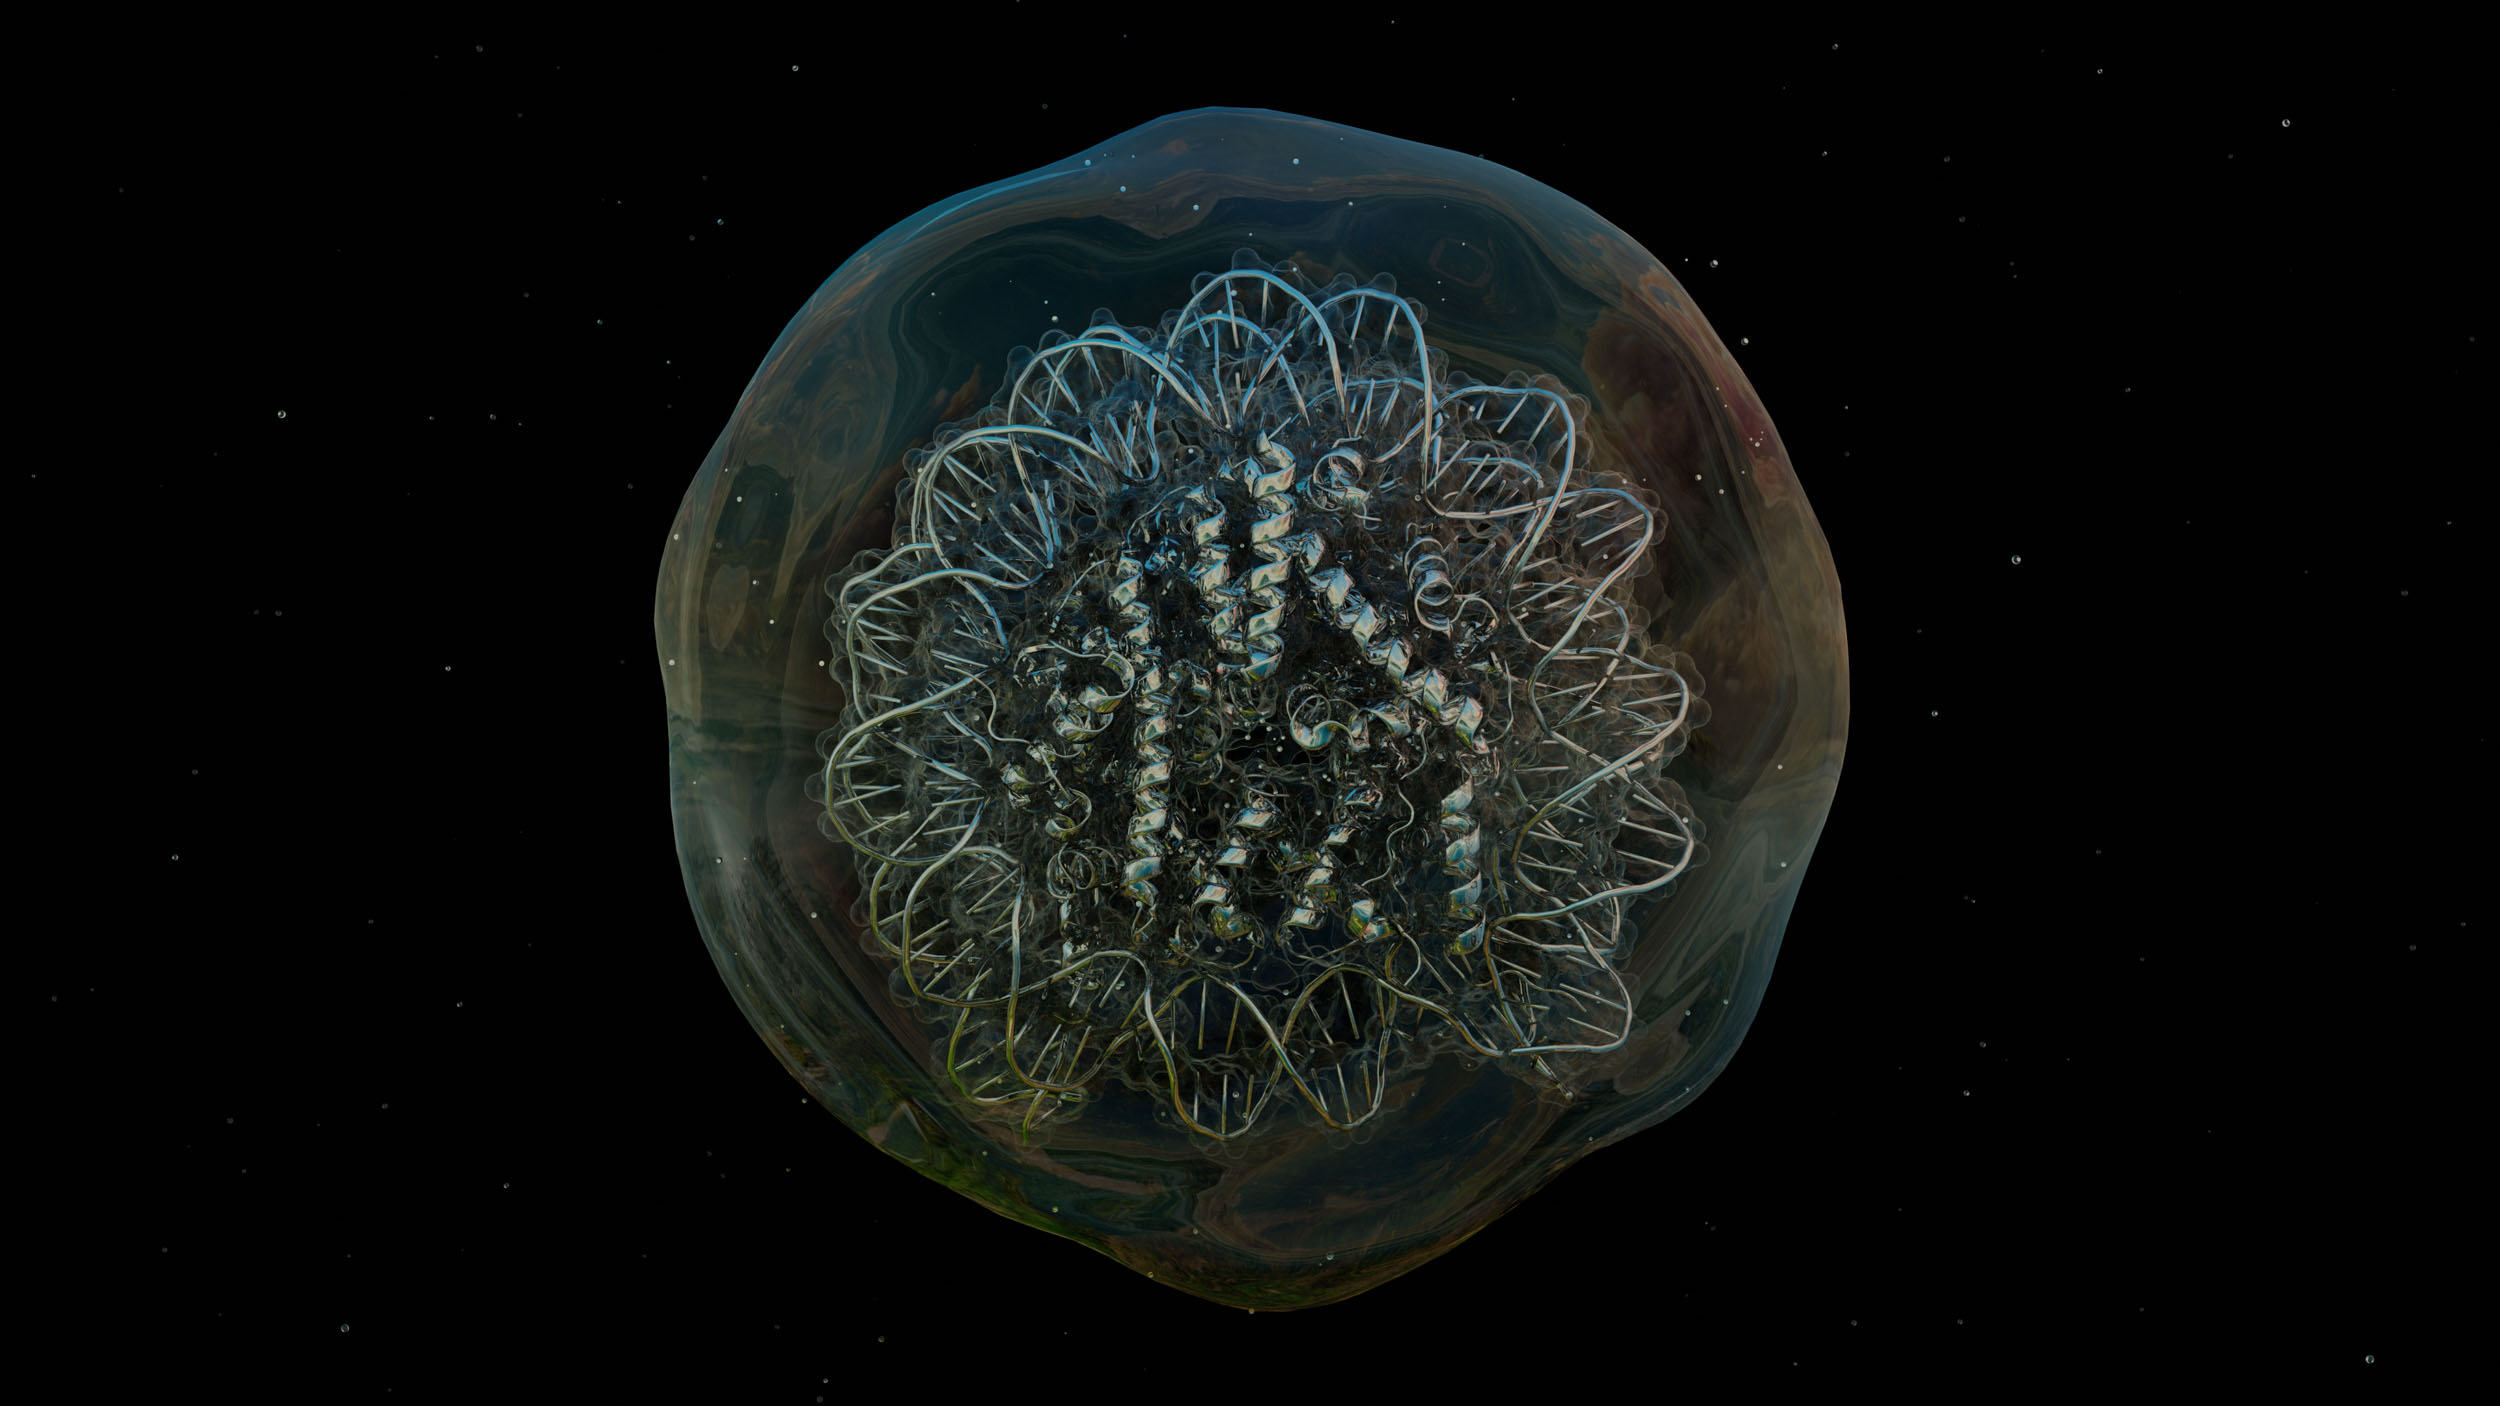 A still image of 3D molecular animations drawn from epigenetic research on environmental influences on gene expression. The animations look shiney glass orbs floating in black space.